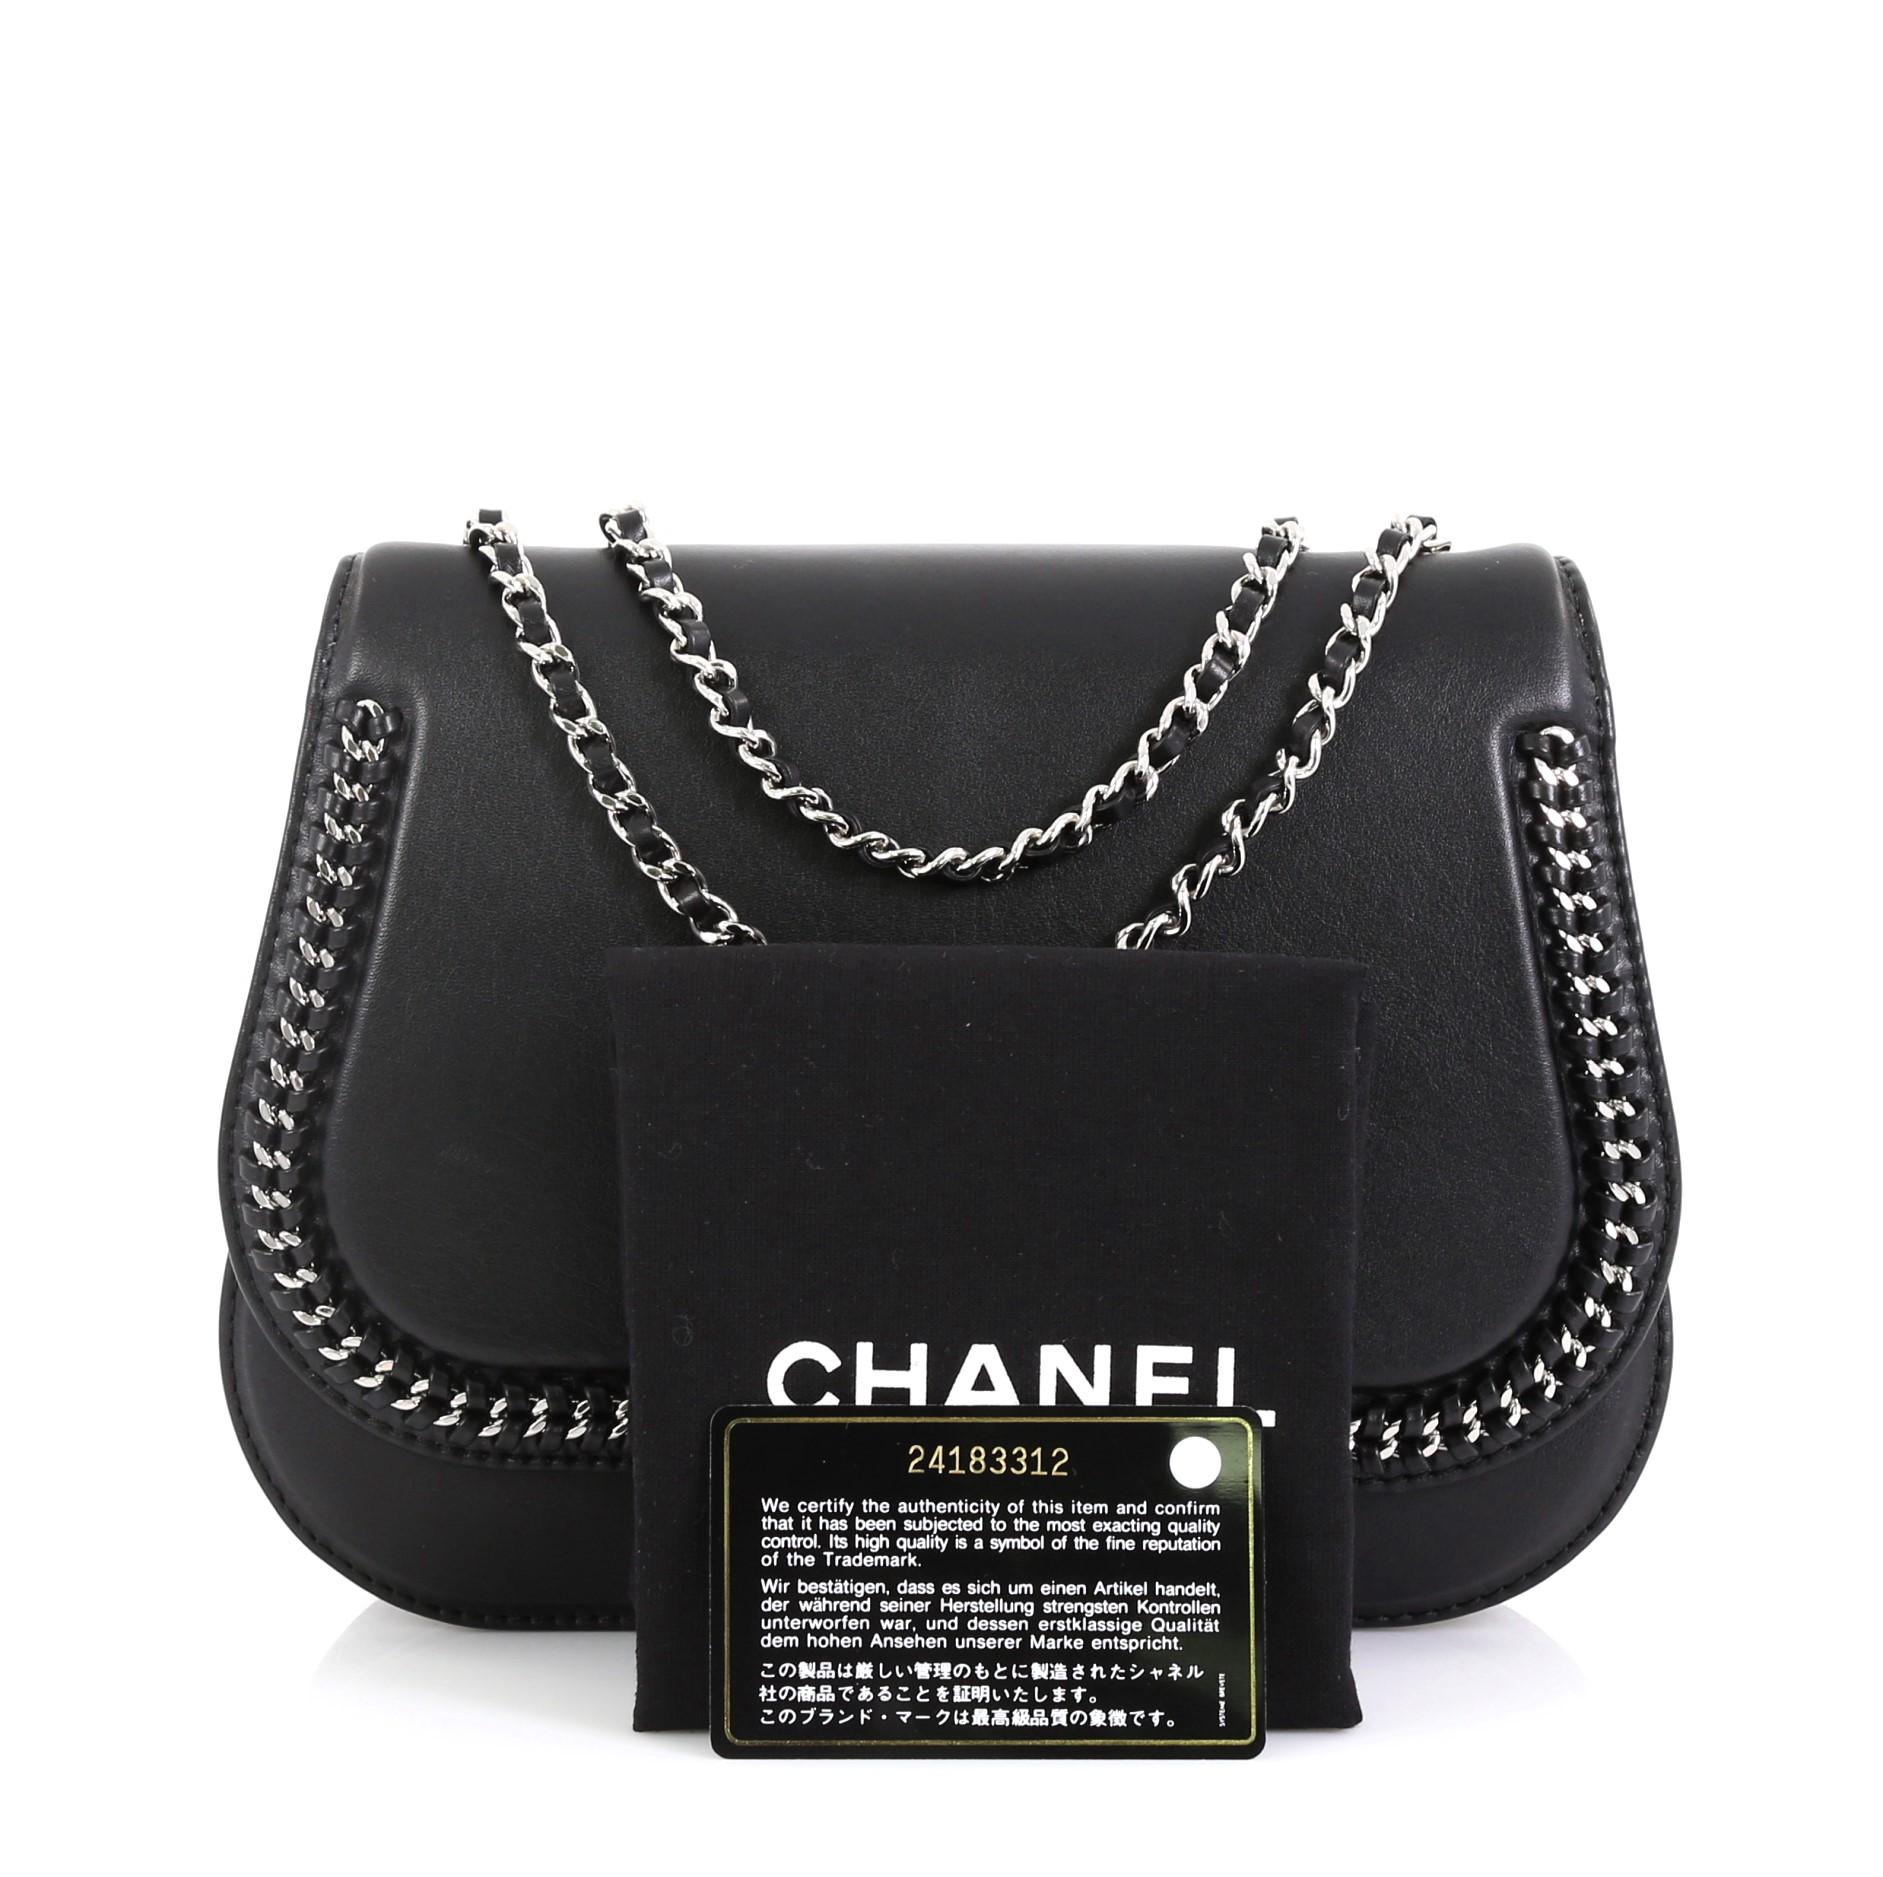 This Chanel Braided Chic Flap Bag Calfskin Small, crafted from black calfskin leather, features woven-in leather chain straps, braided detailing and silver-tone hardware. Its CC turn-lock closure opens to a black fabric interior divided into two